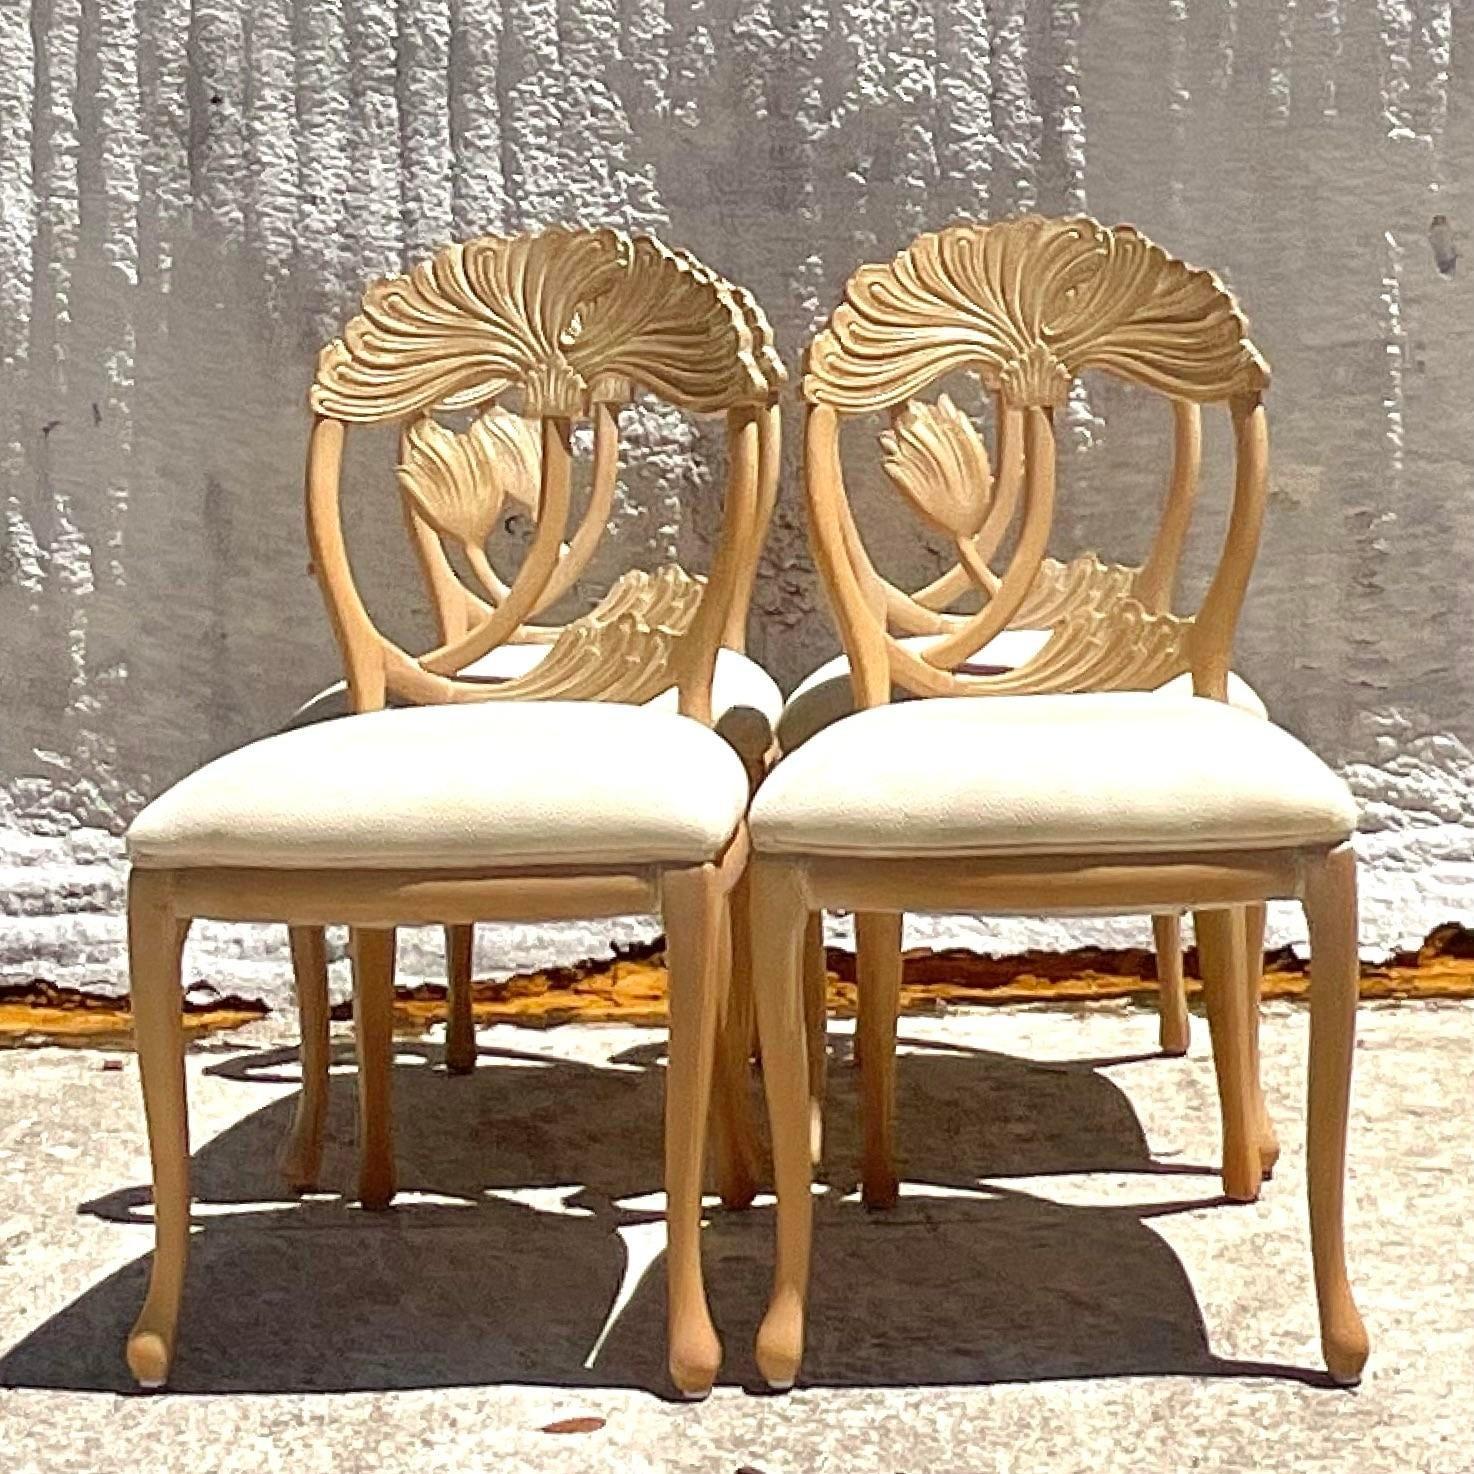 Vintage Boho Carved Lotus Blossom Dining Chairs - Set of 4 For Sale 3